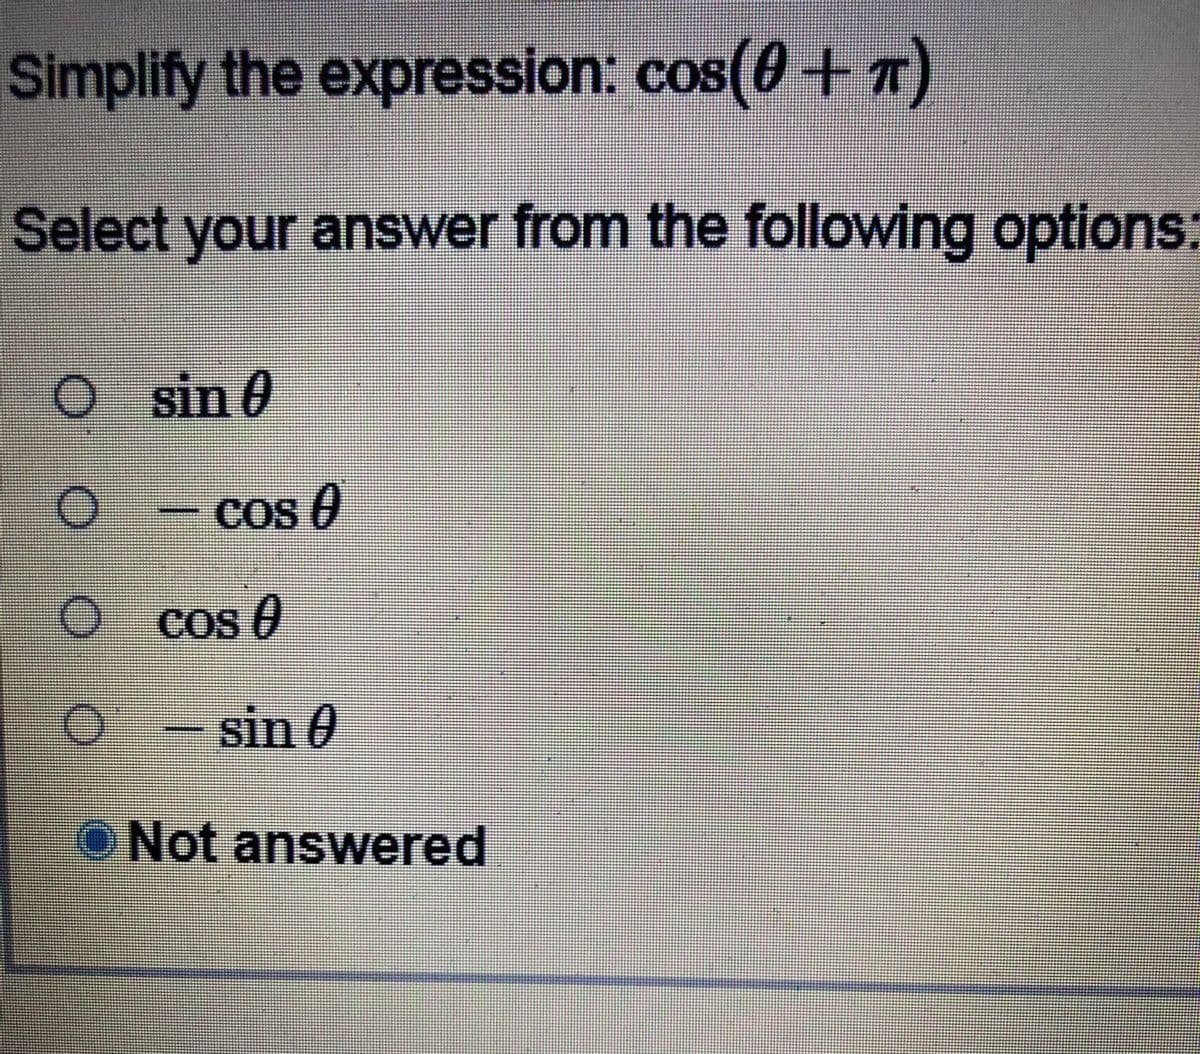 Simplify the expression: cos+7
Select your answer from the following options:
sin 0
O-cos 0
O cos 0
-sin 0
O Not answered
